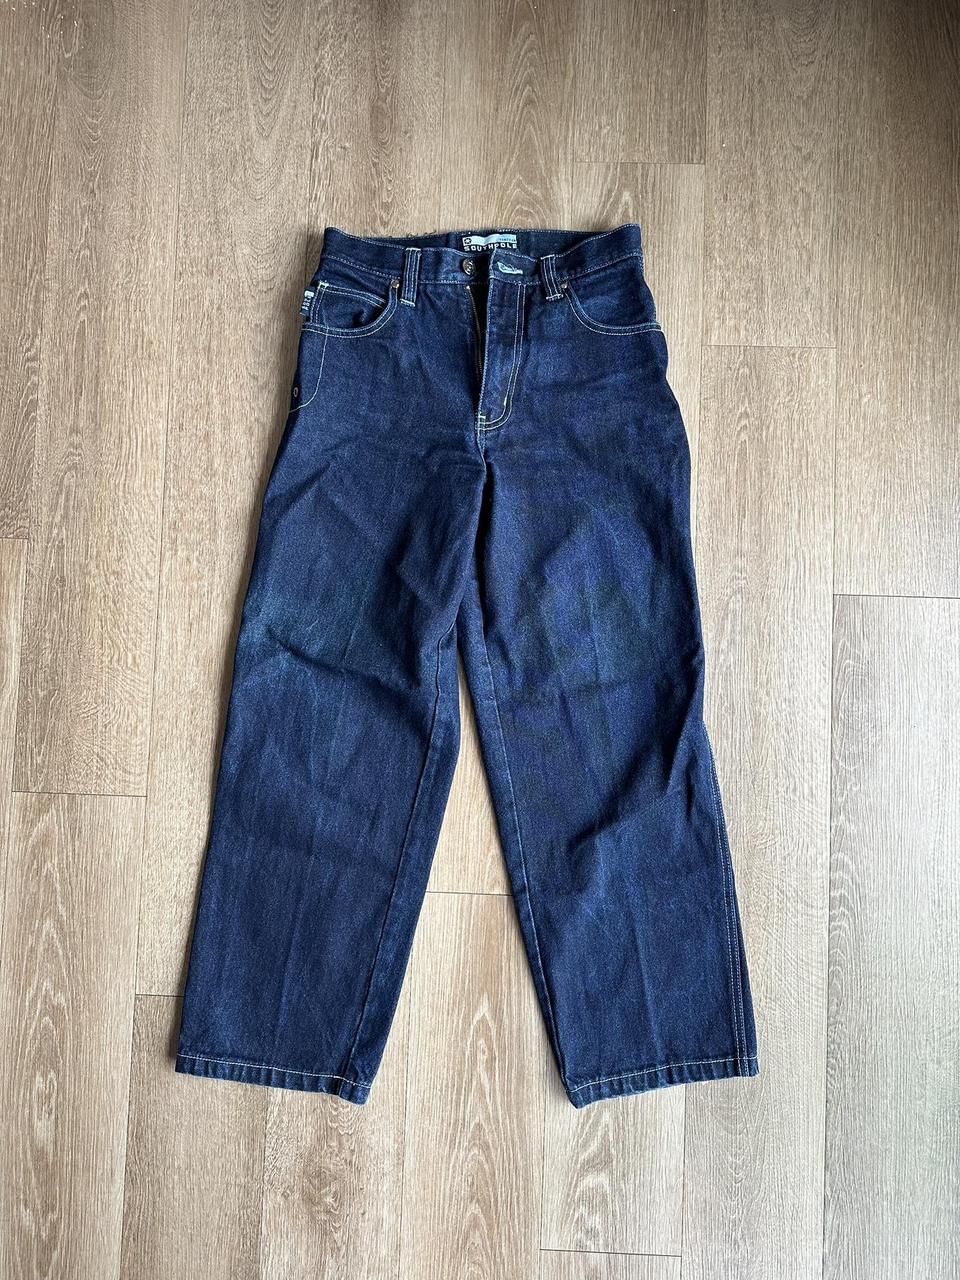 southpole jeans measurements are pictured - Depop